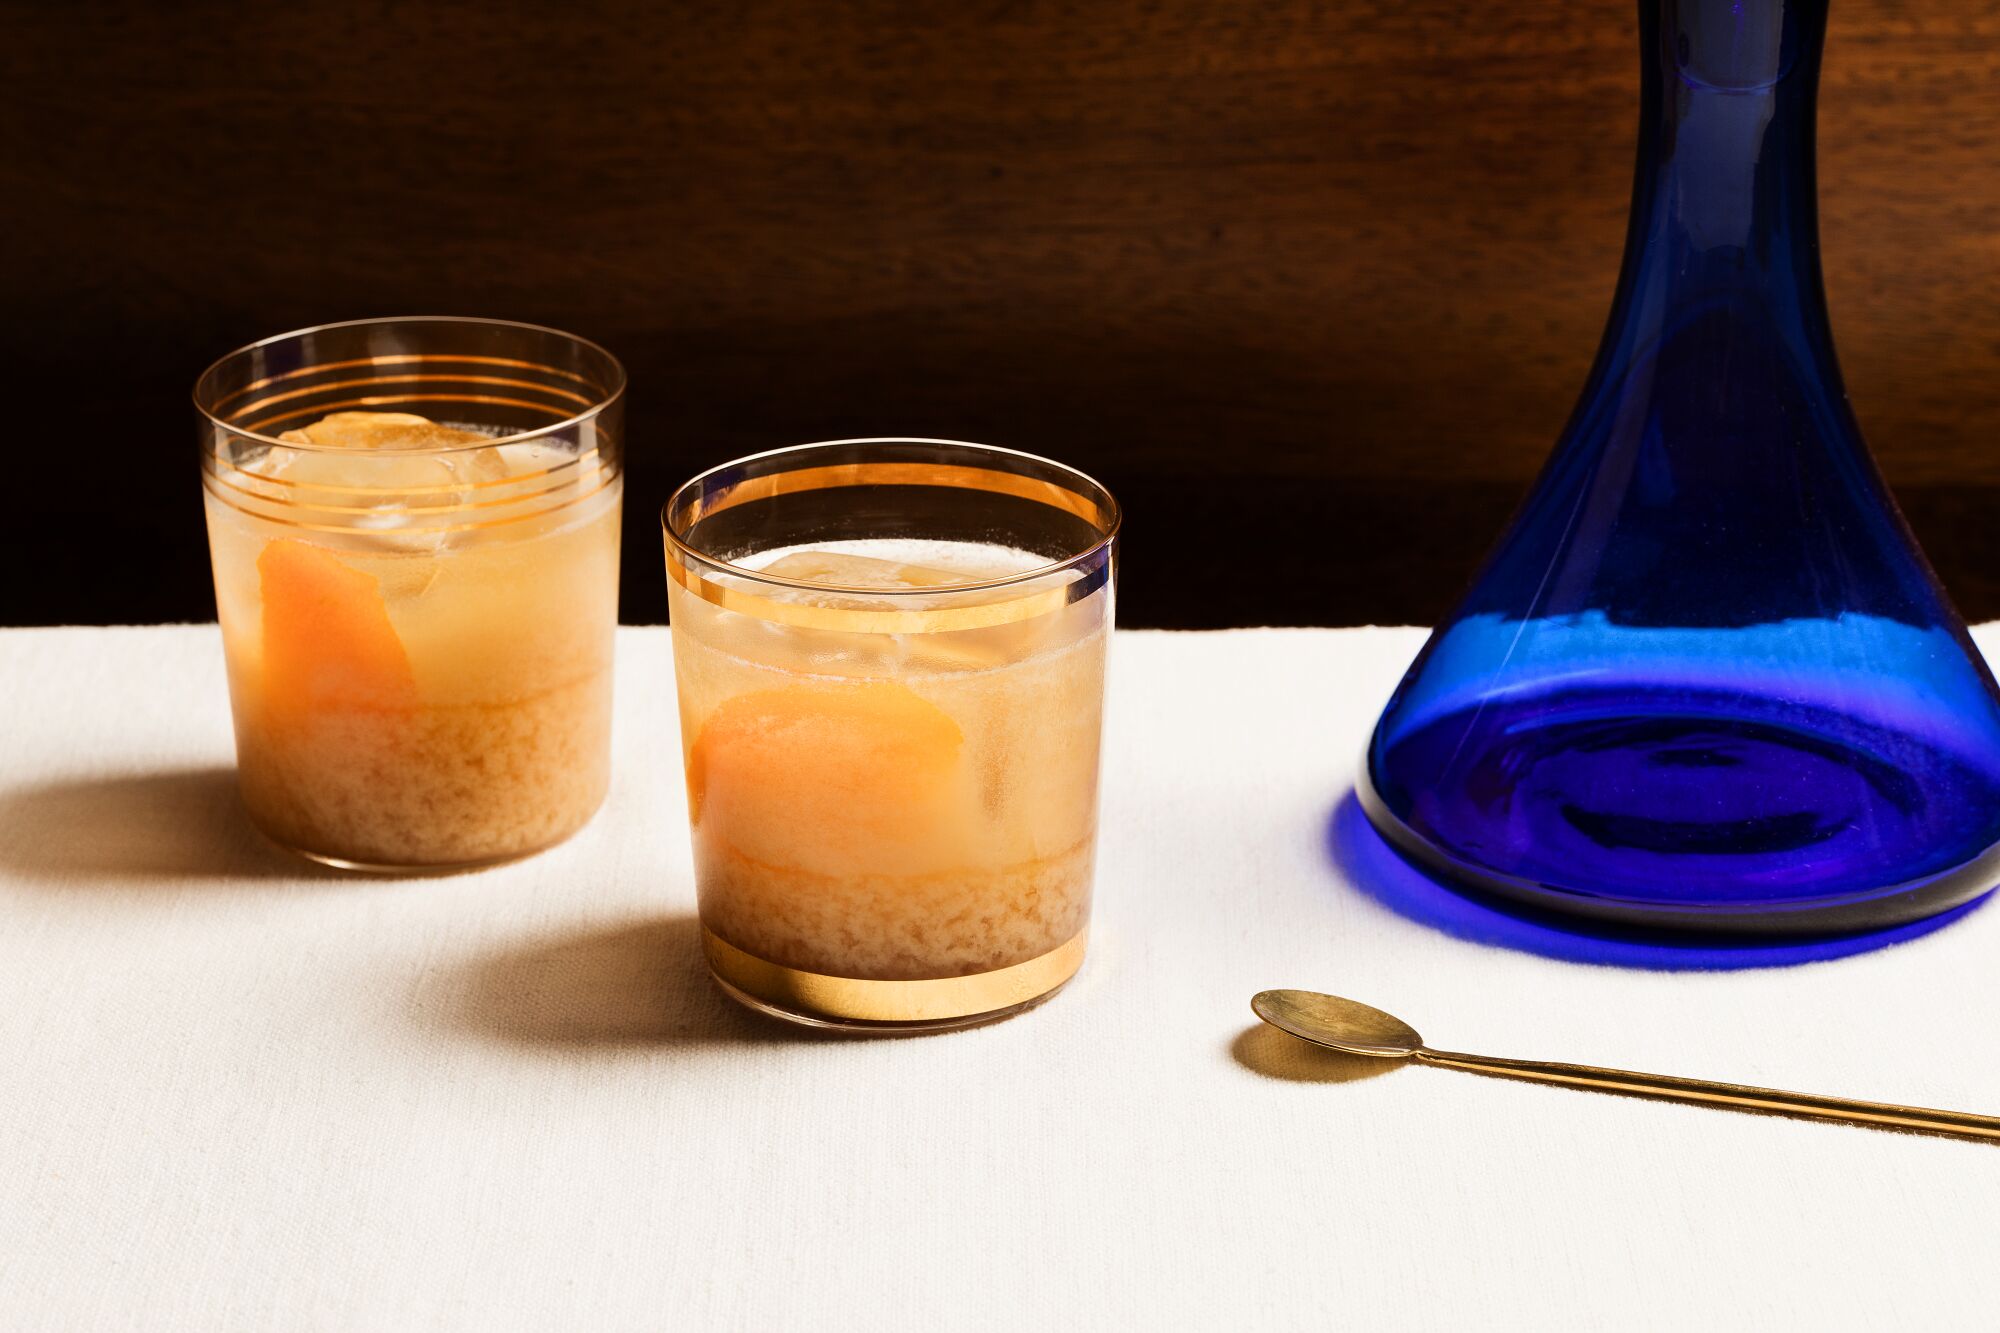 Two cocktail glasses with a light brown drink next to a blue glass vase.